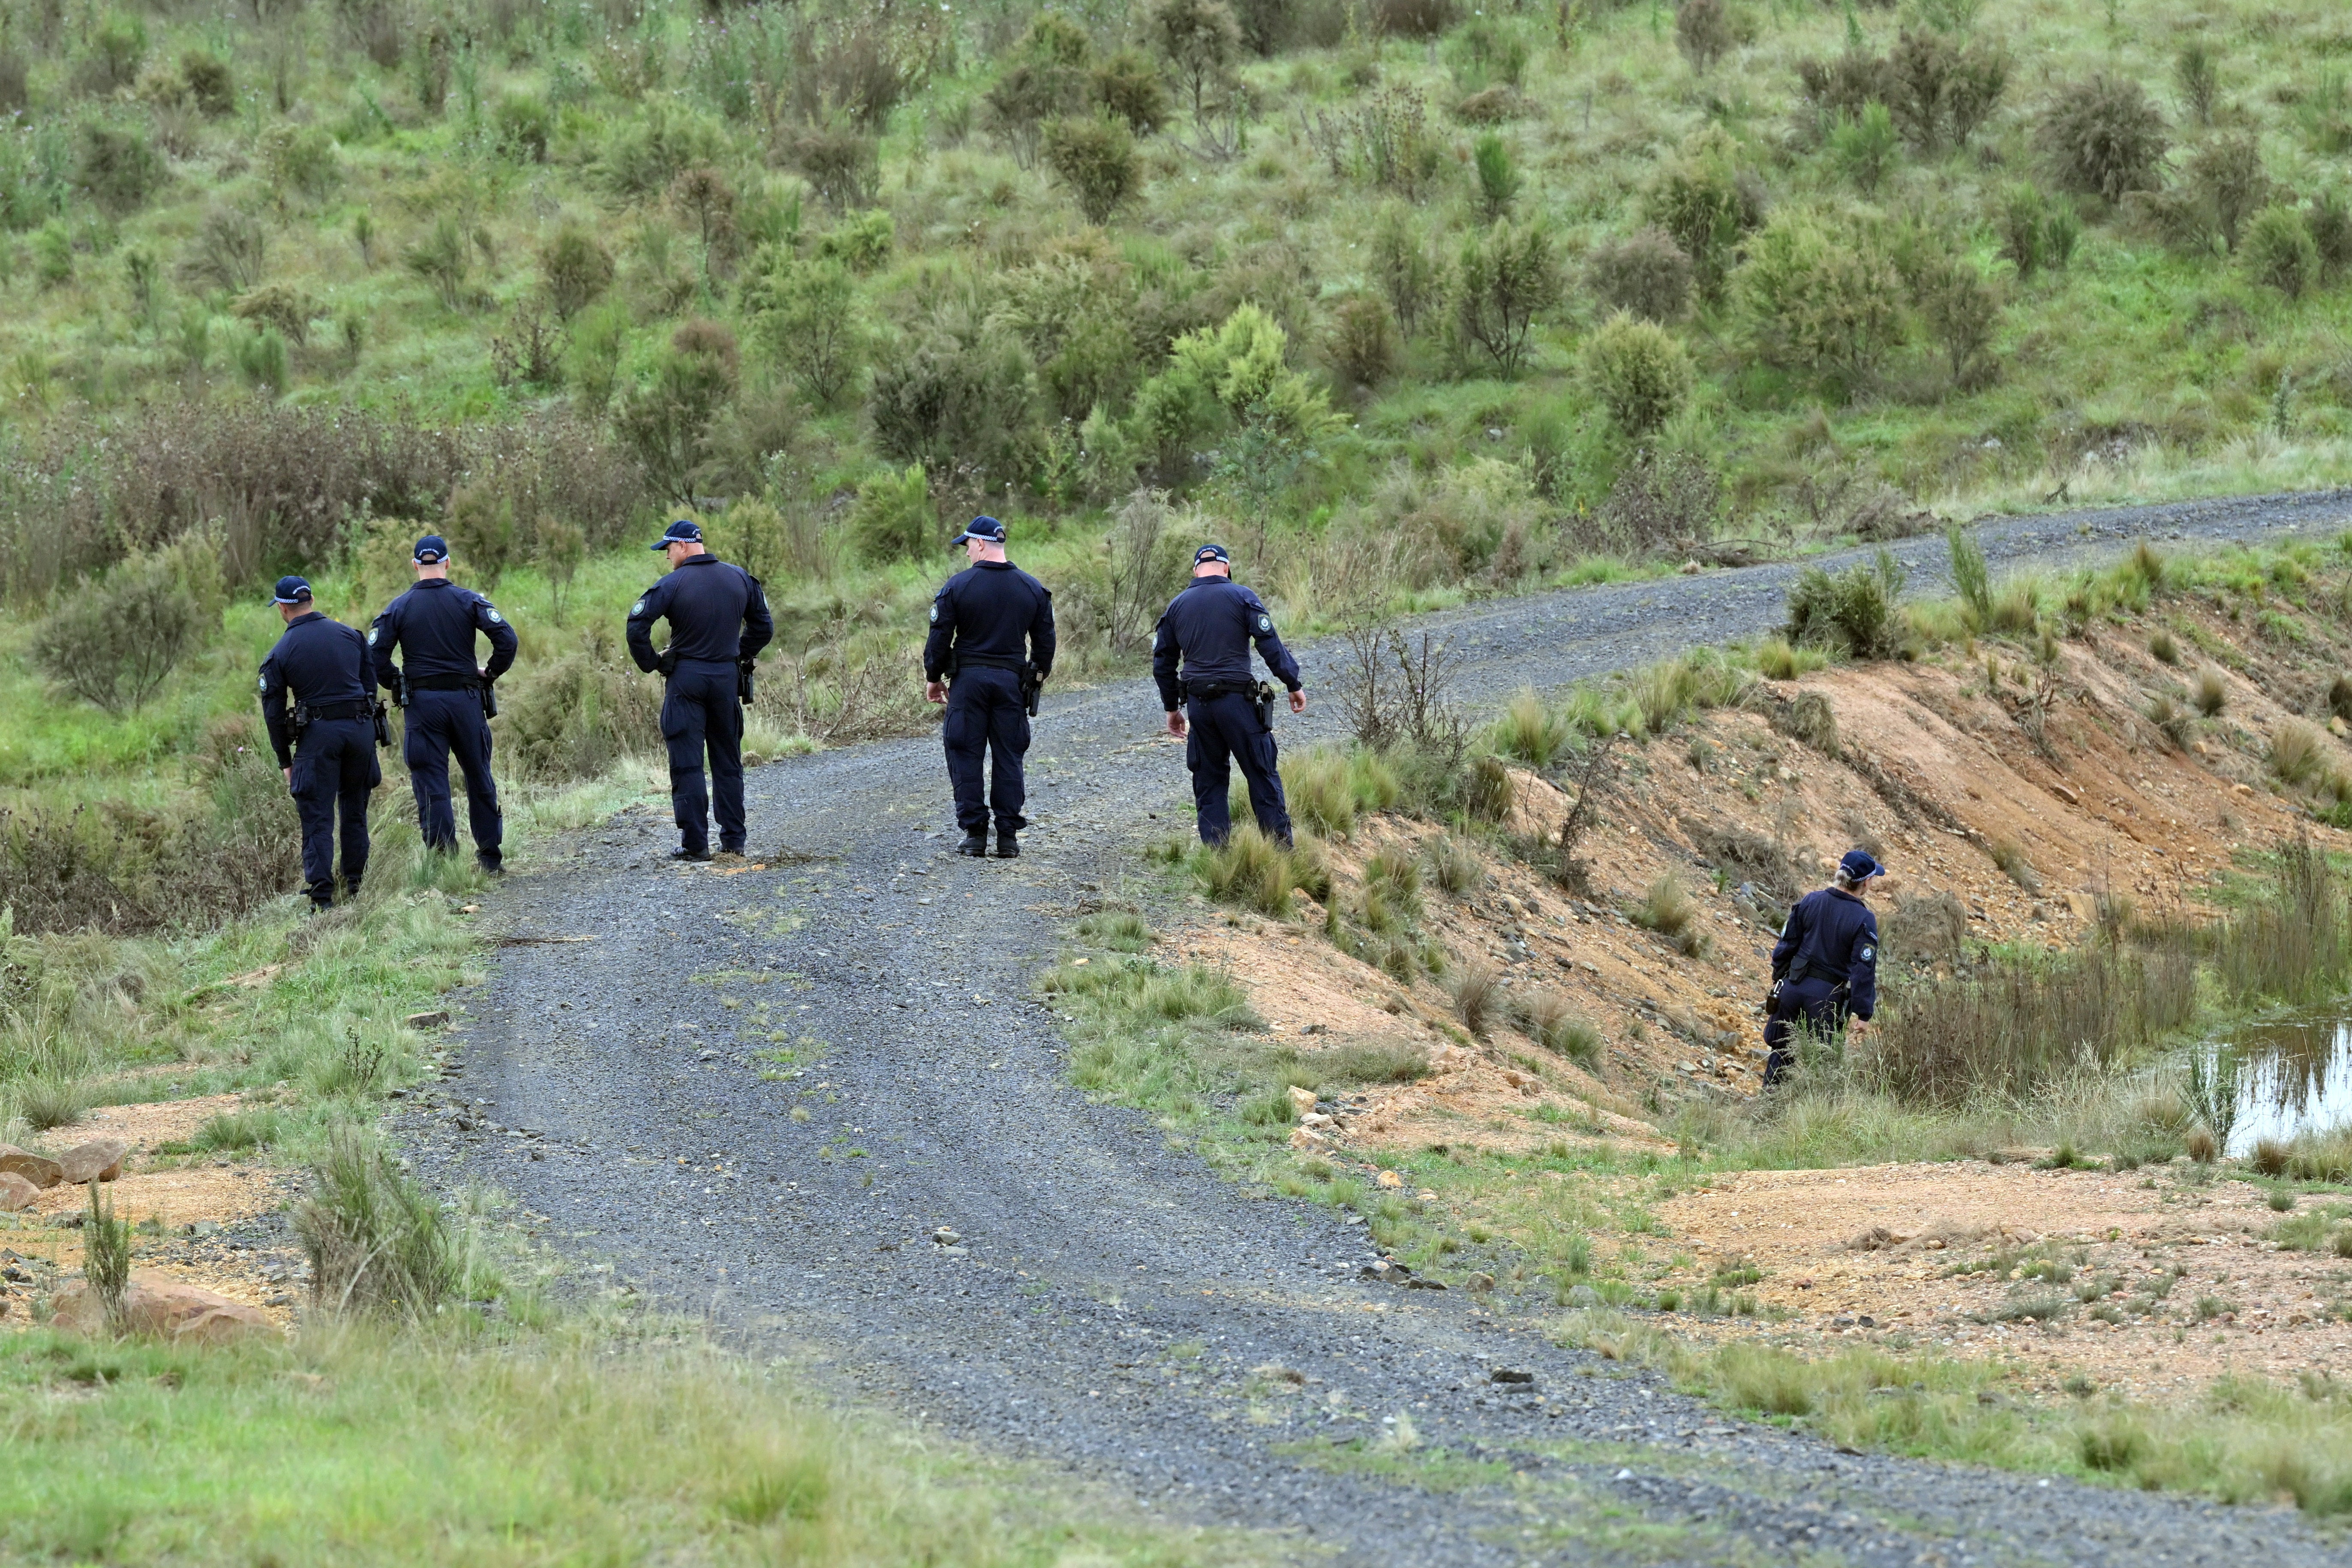 Police conducted extensive searches of the area before the bodies were eventually discovered